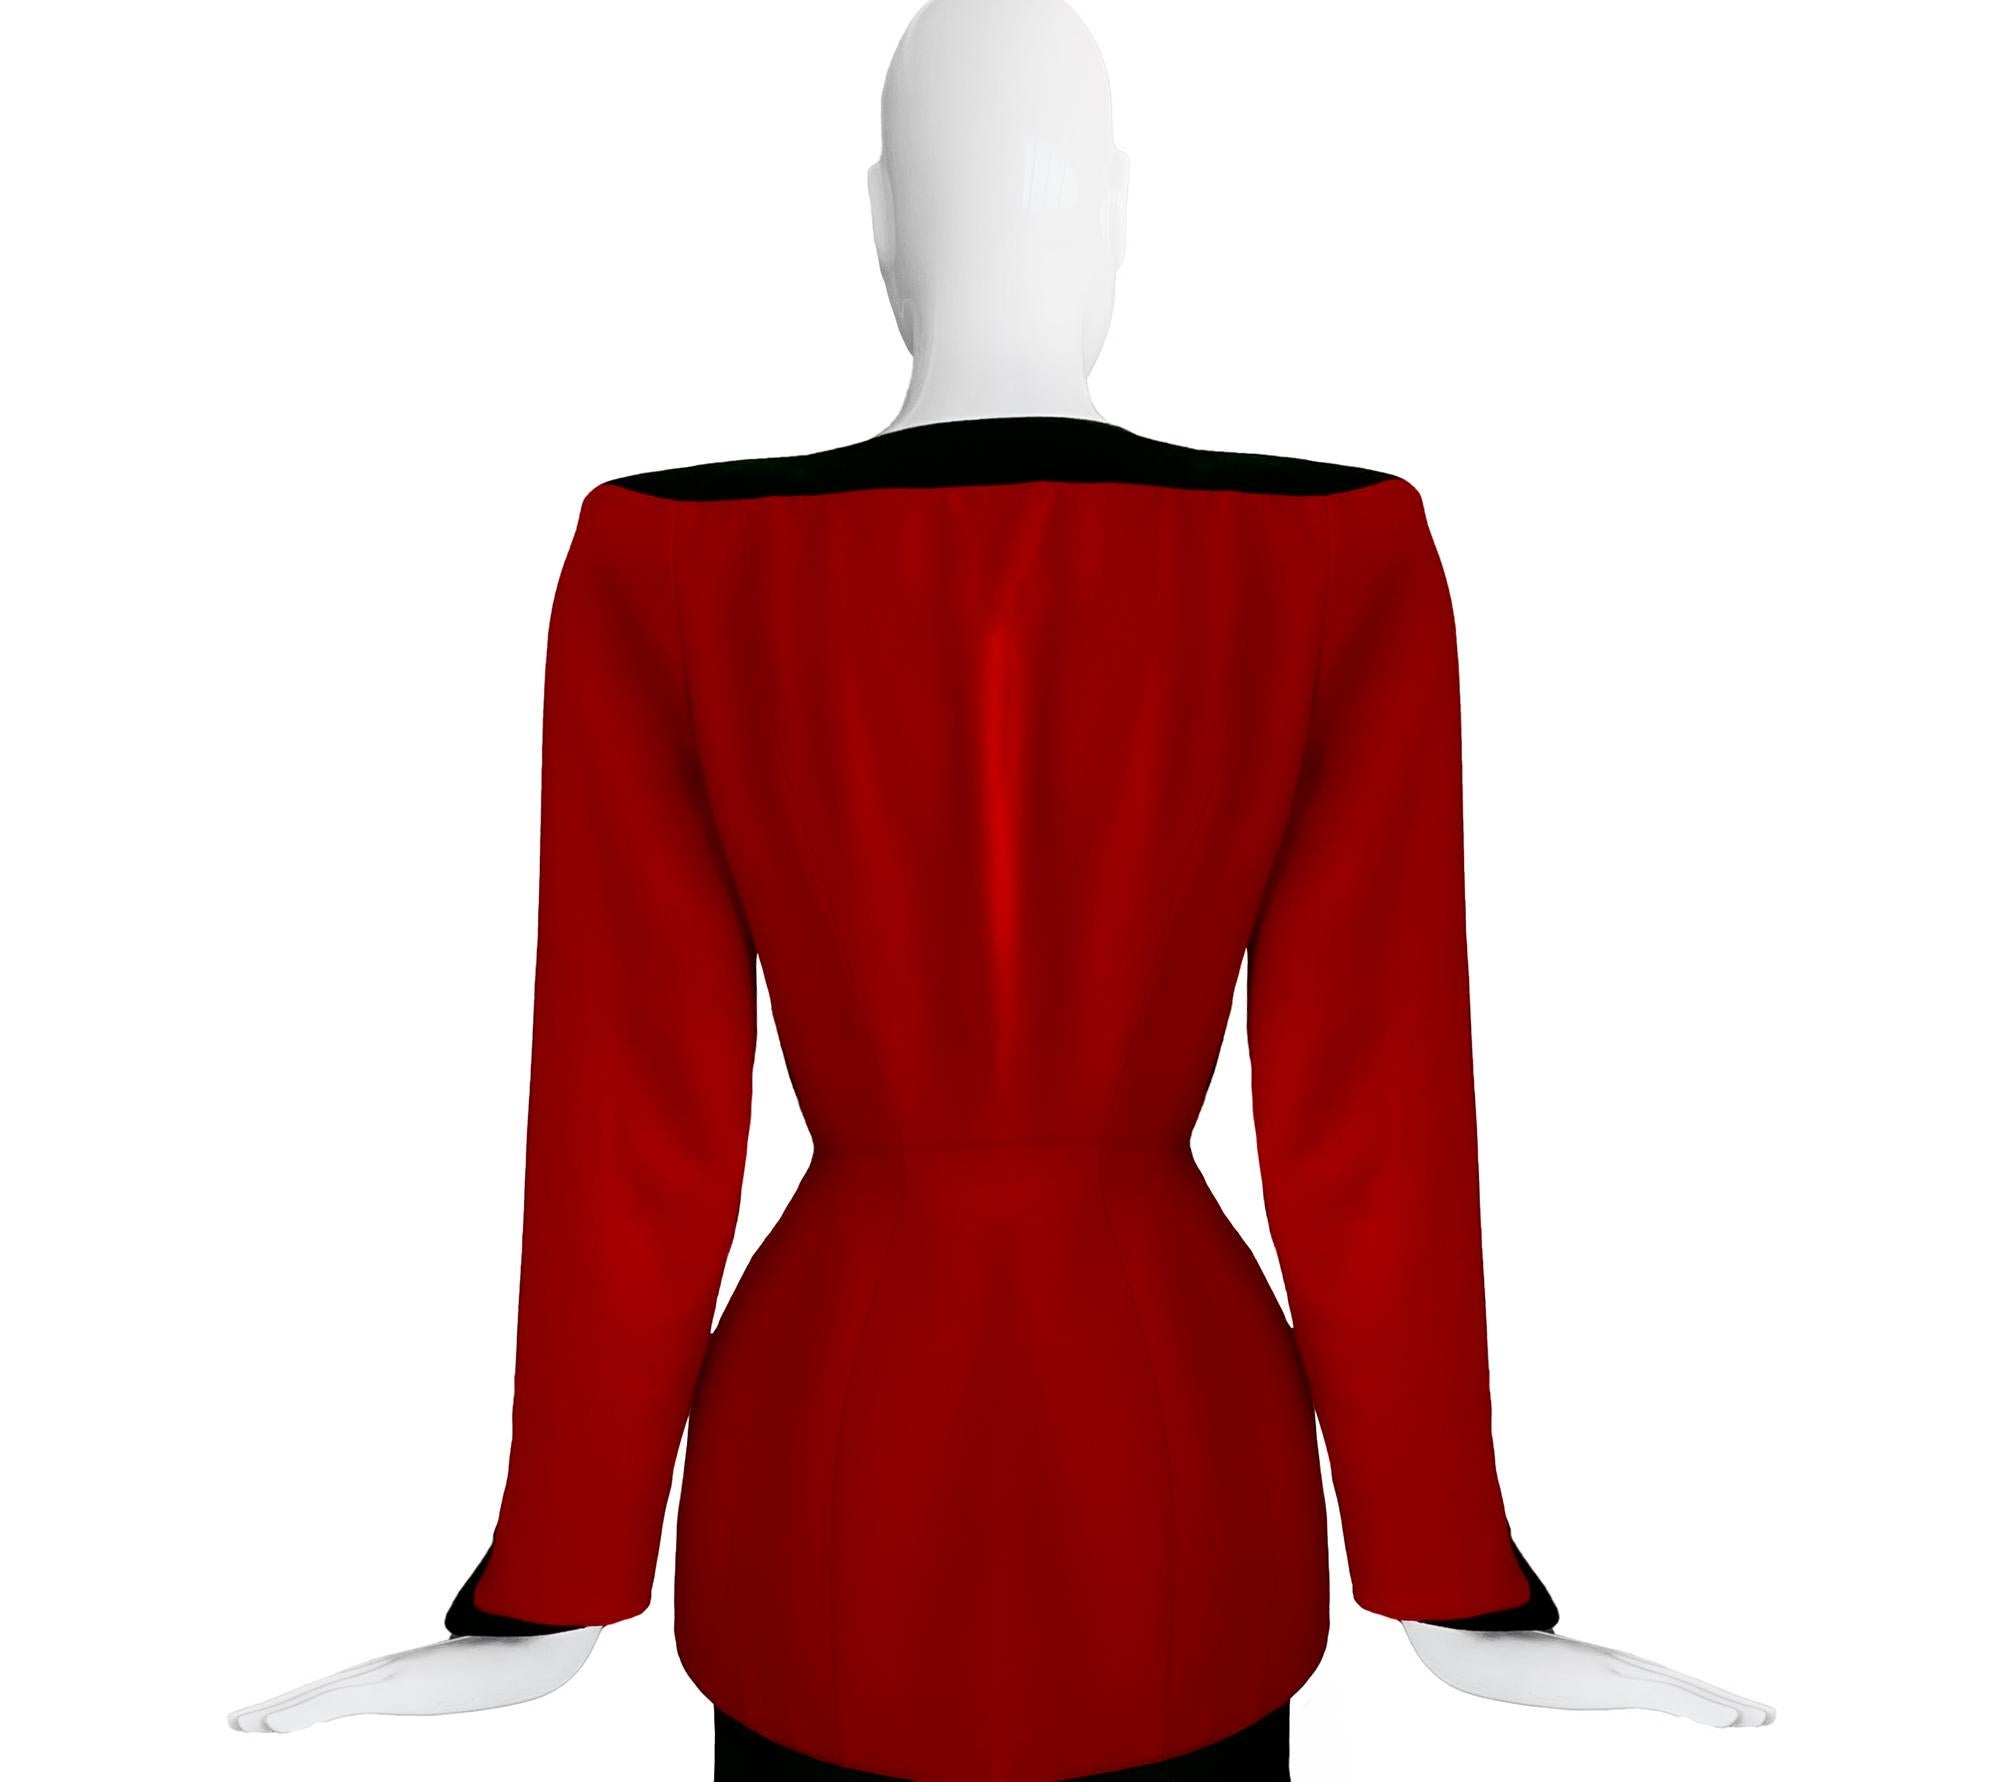 Thierry Mugler FW 1998/99 Suit Dramatic Deep V-Neck Jacket and Skirt Red Black  2